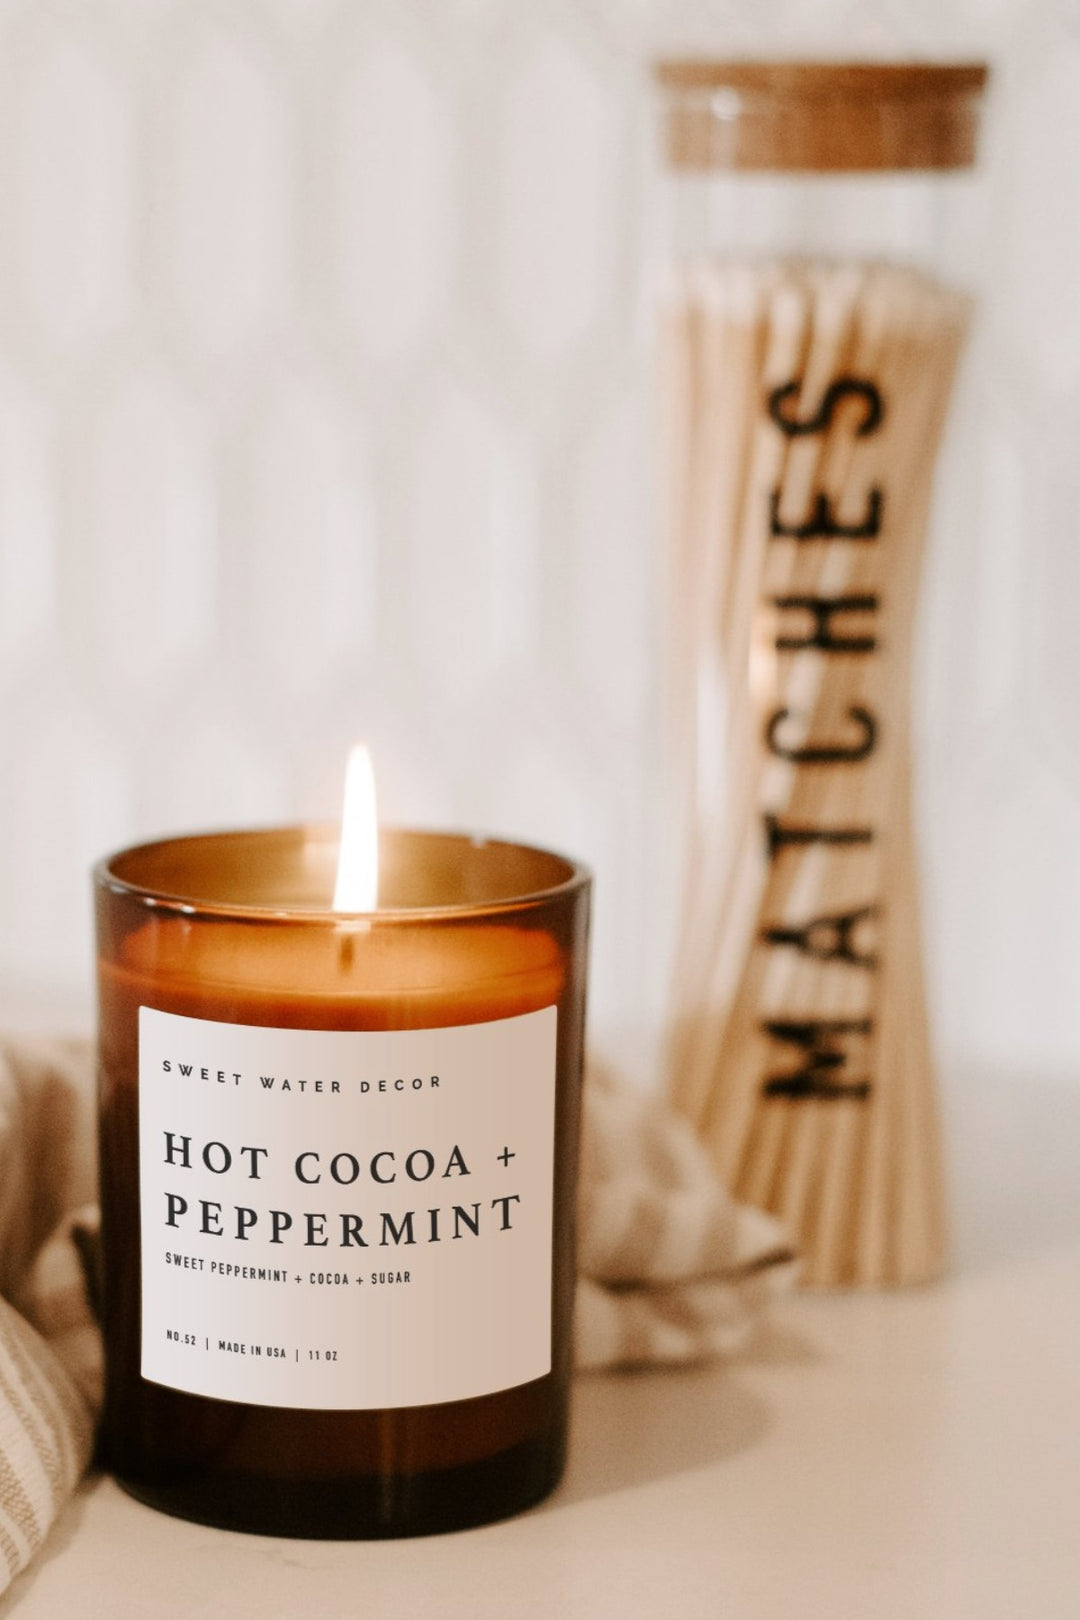 HOT COCOA + PEPPERMINT AMBER CANDLE